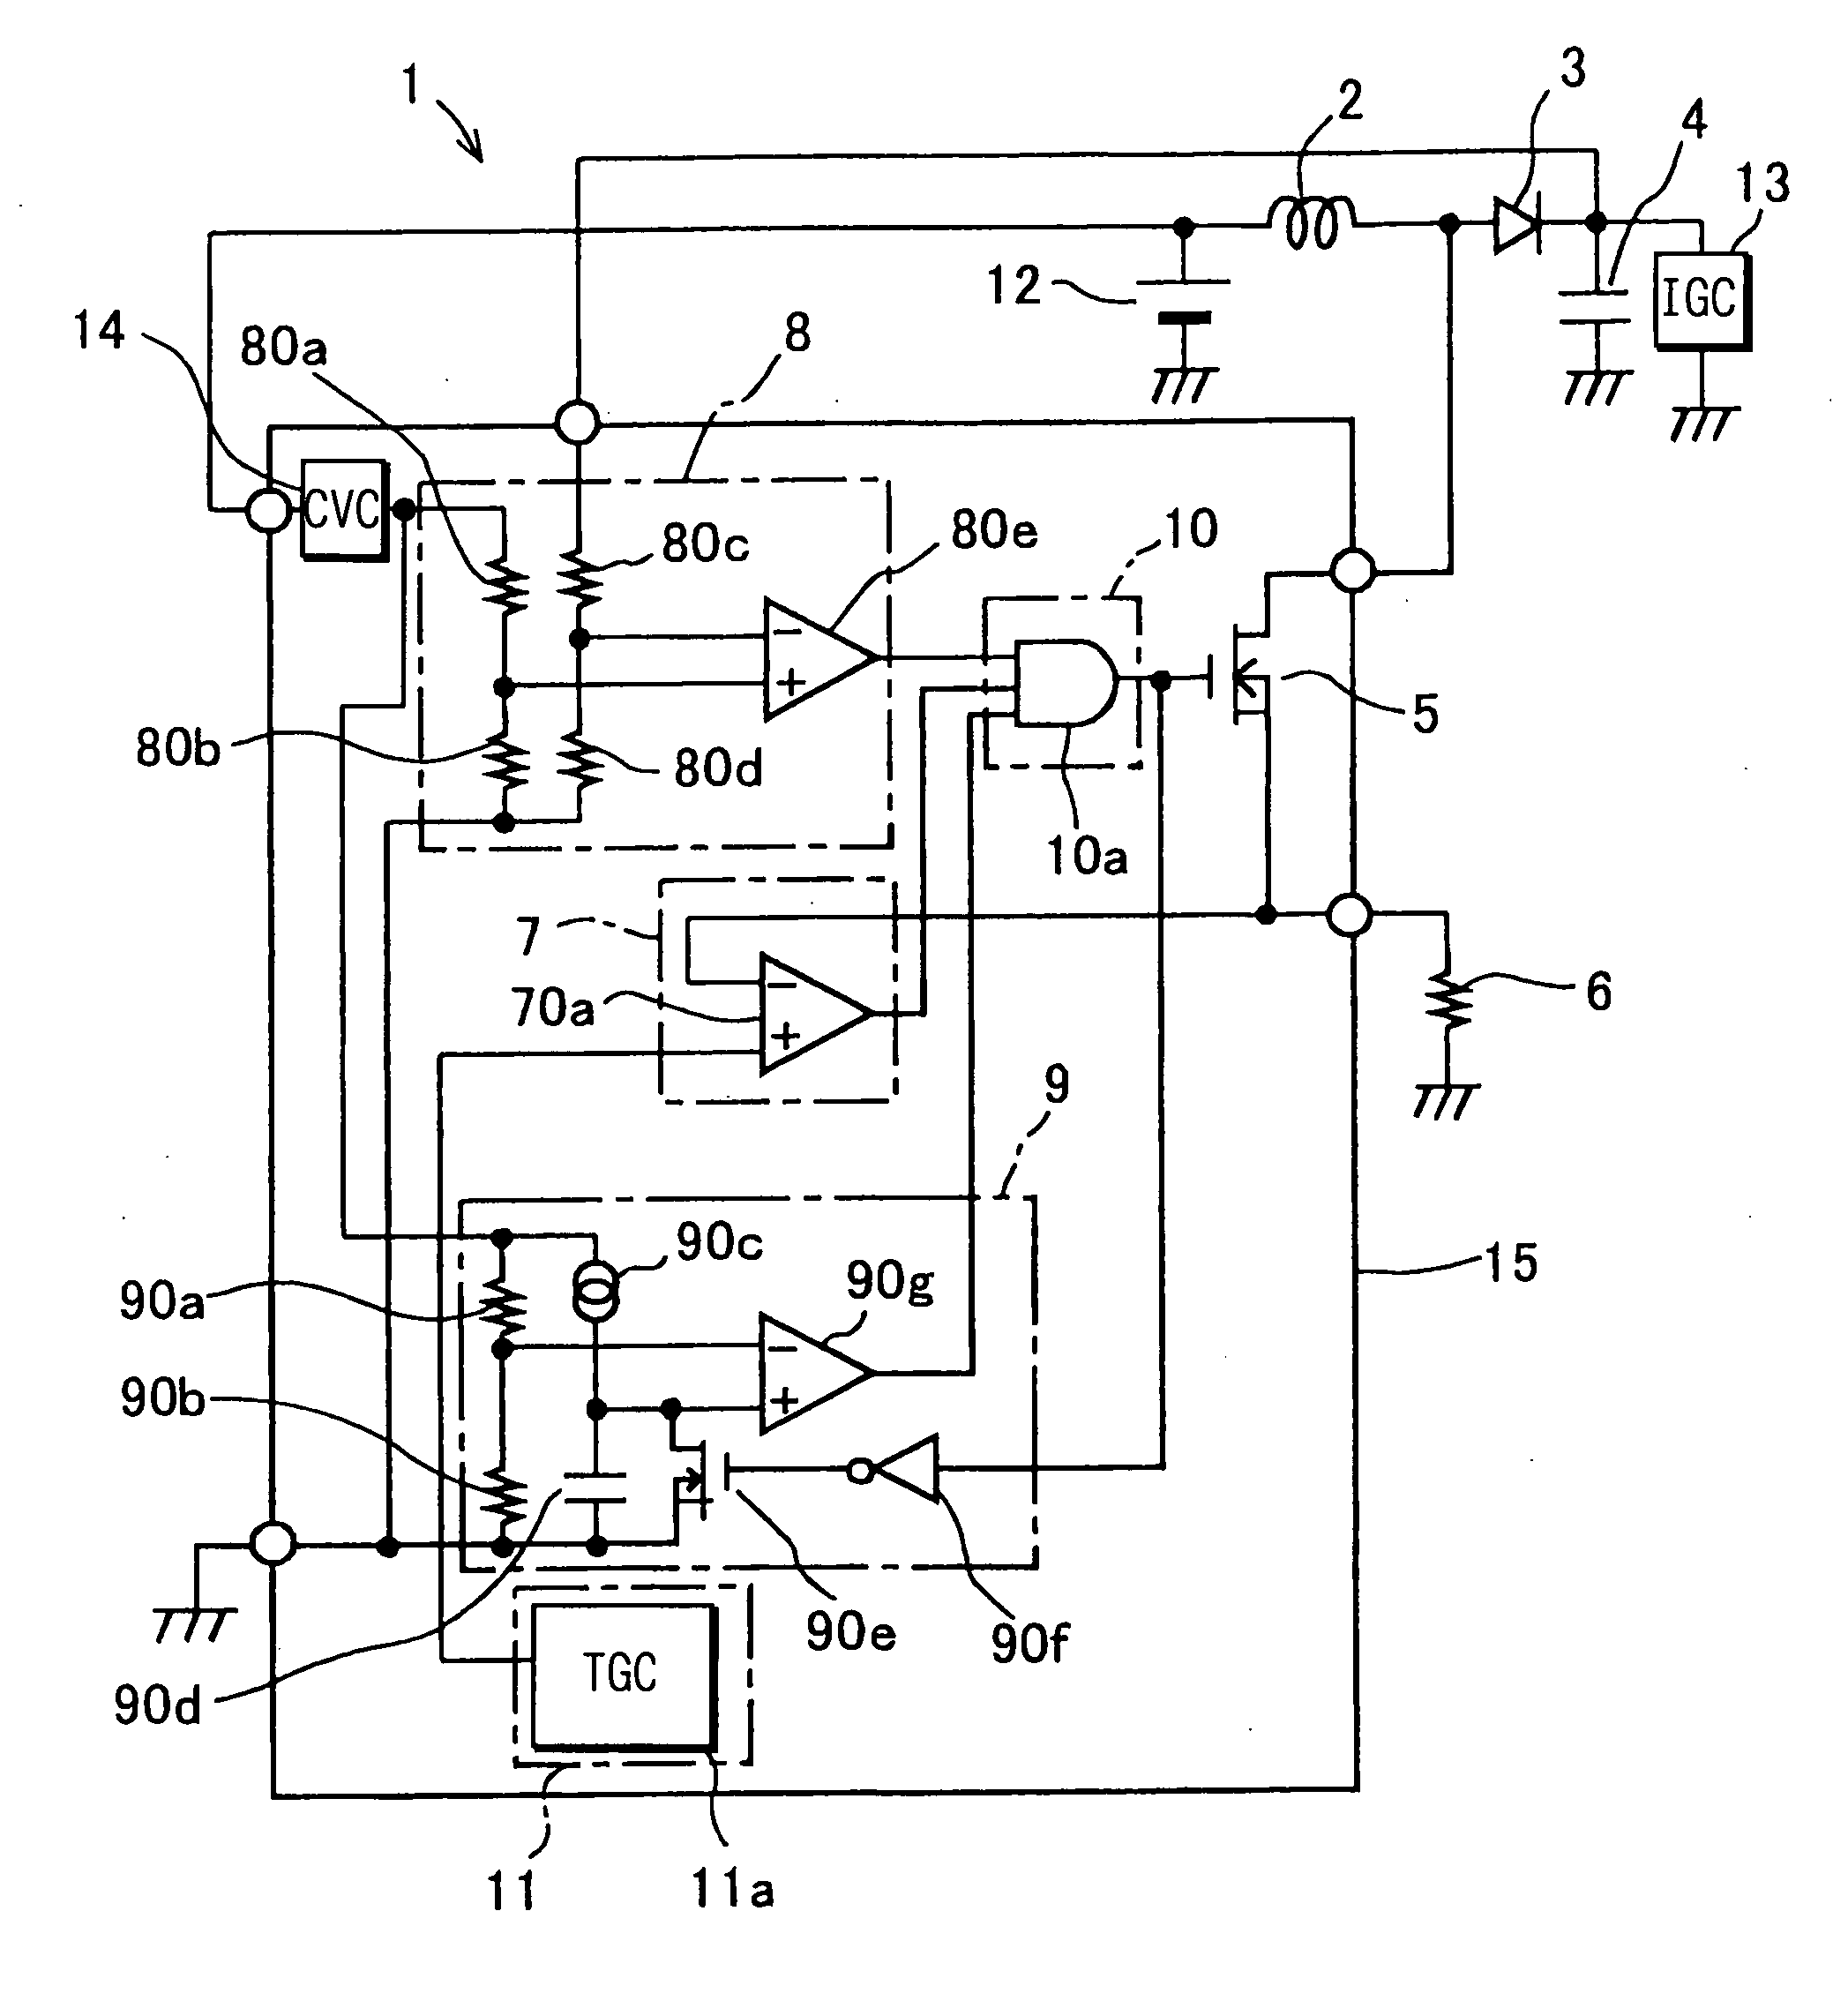 DC-DC converter for boosting input voltage at variable frequency